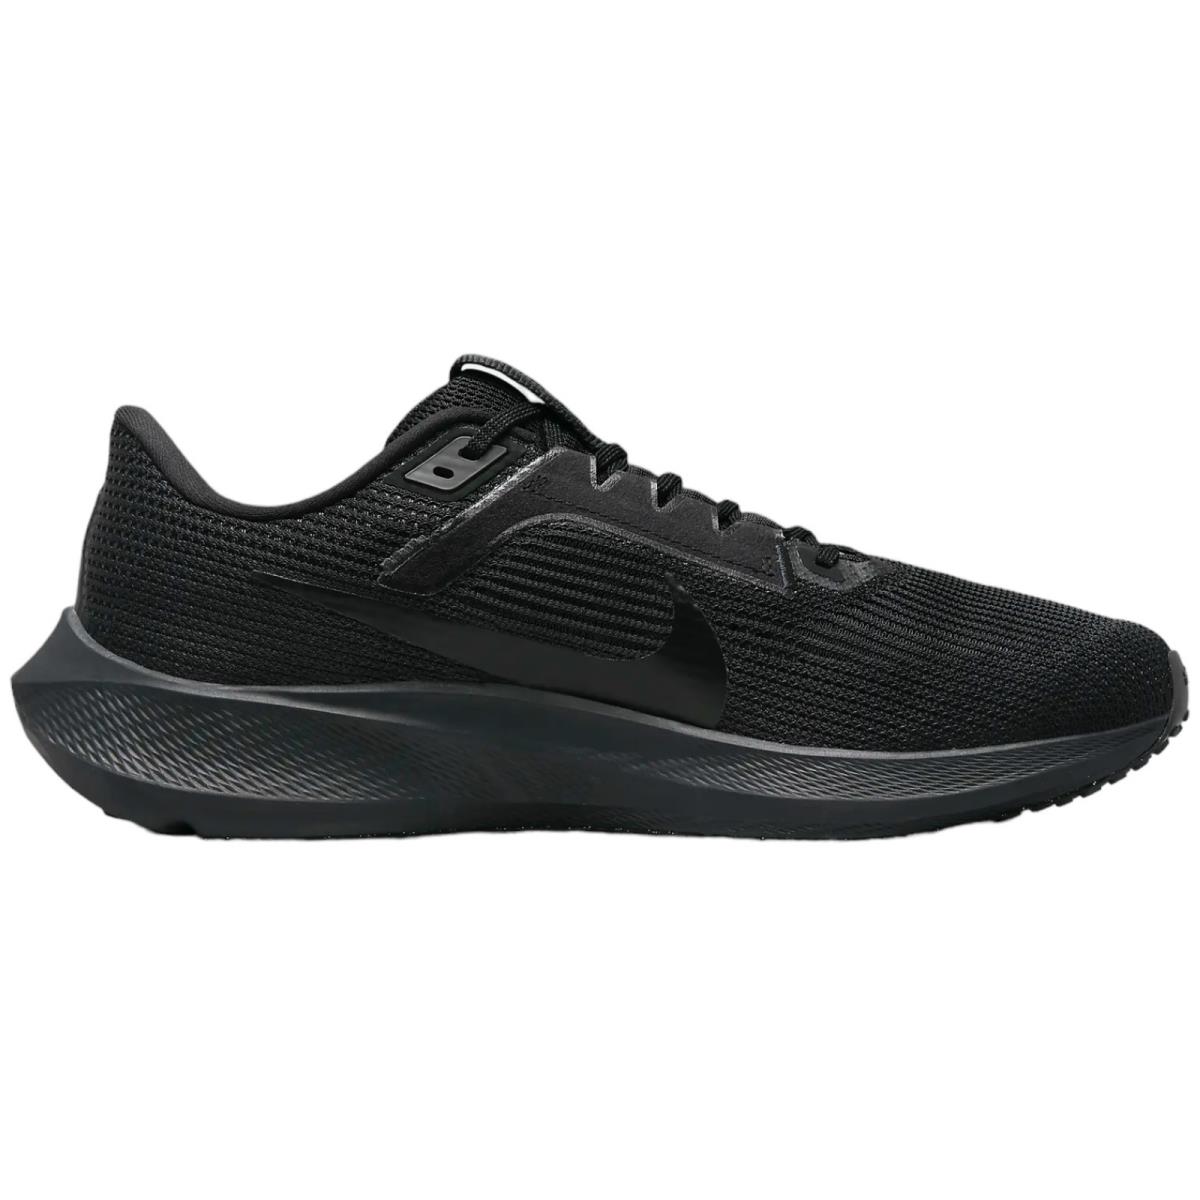 Nike Air Zoom Pegasus 40 Men`s Running Shoes All Colors US Sizes 7-14 Black/Anthracite/Black